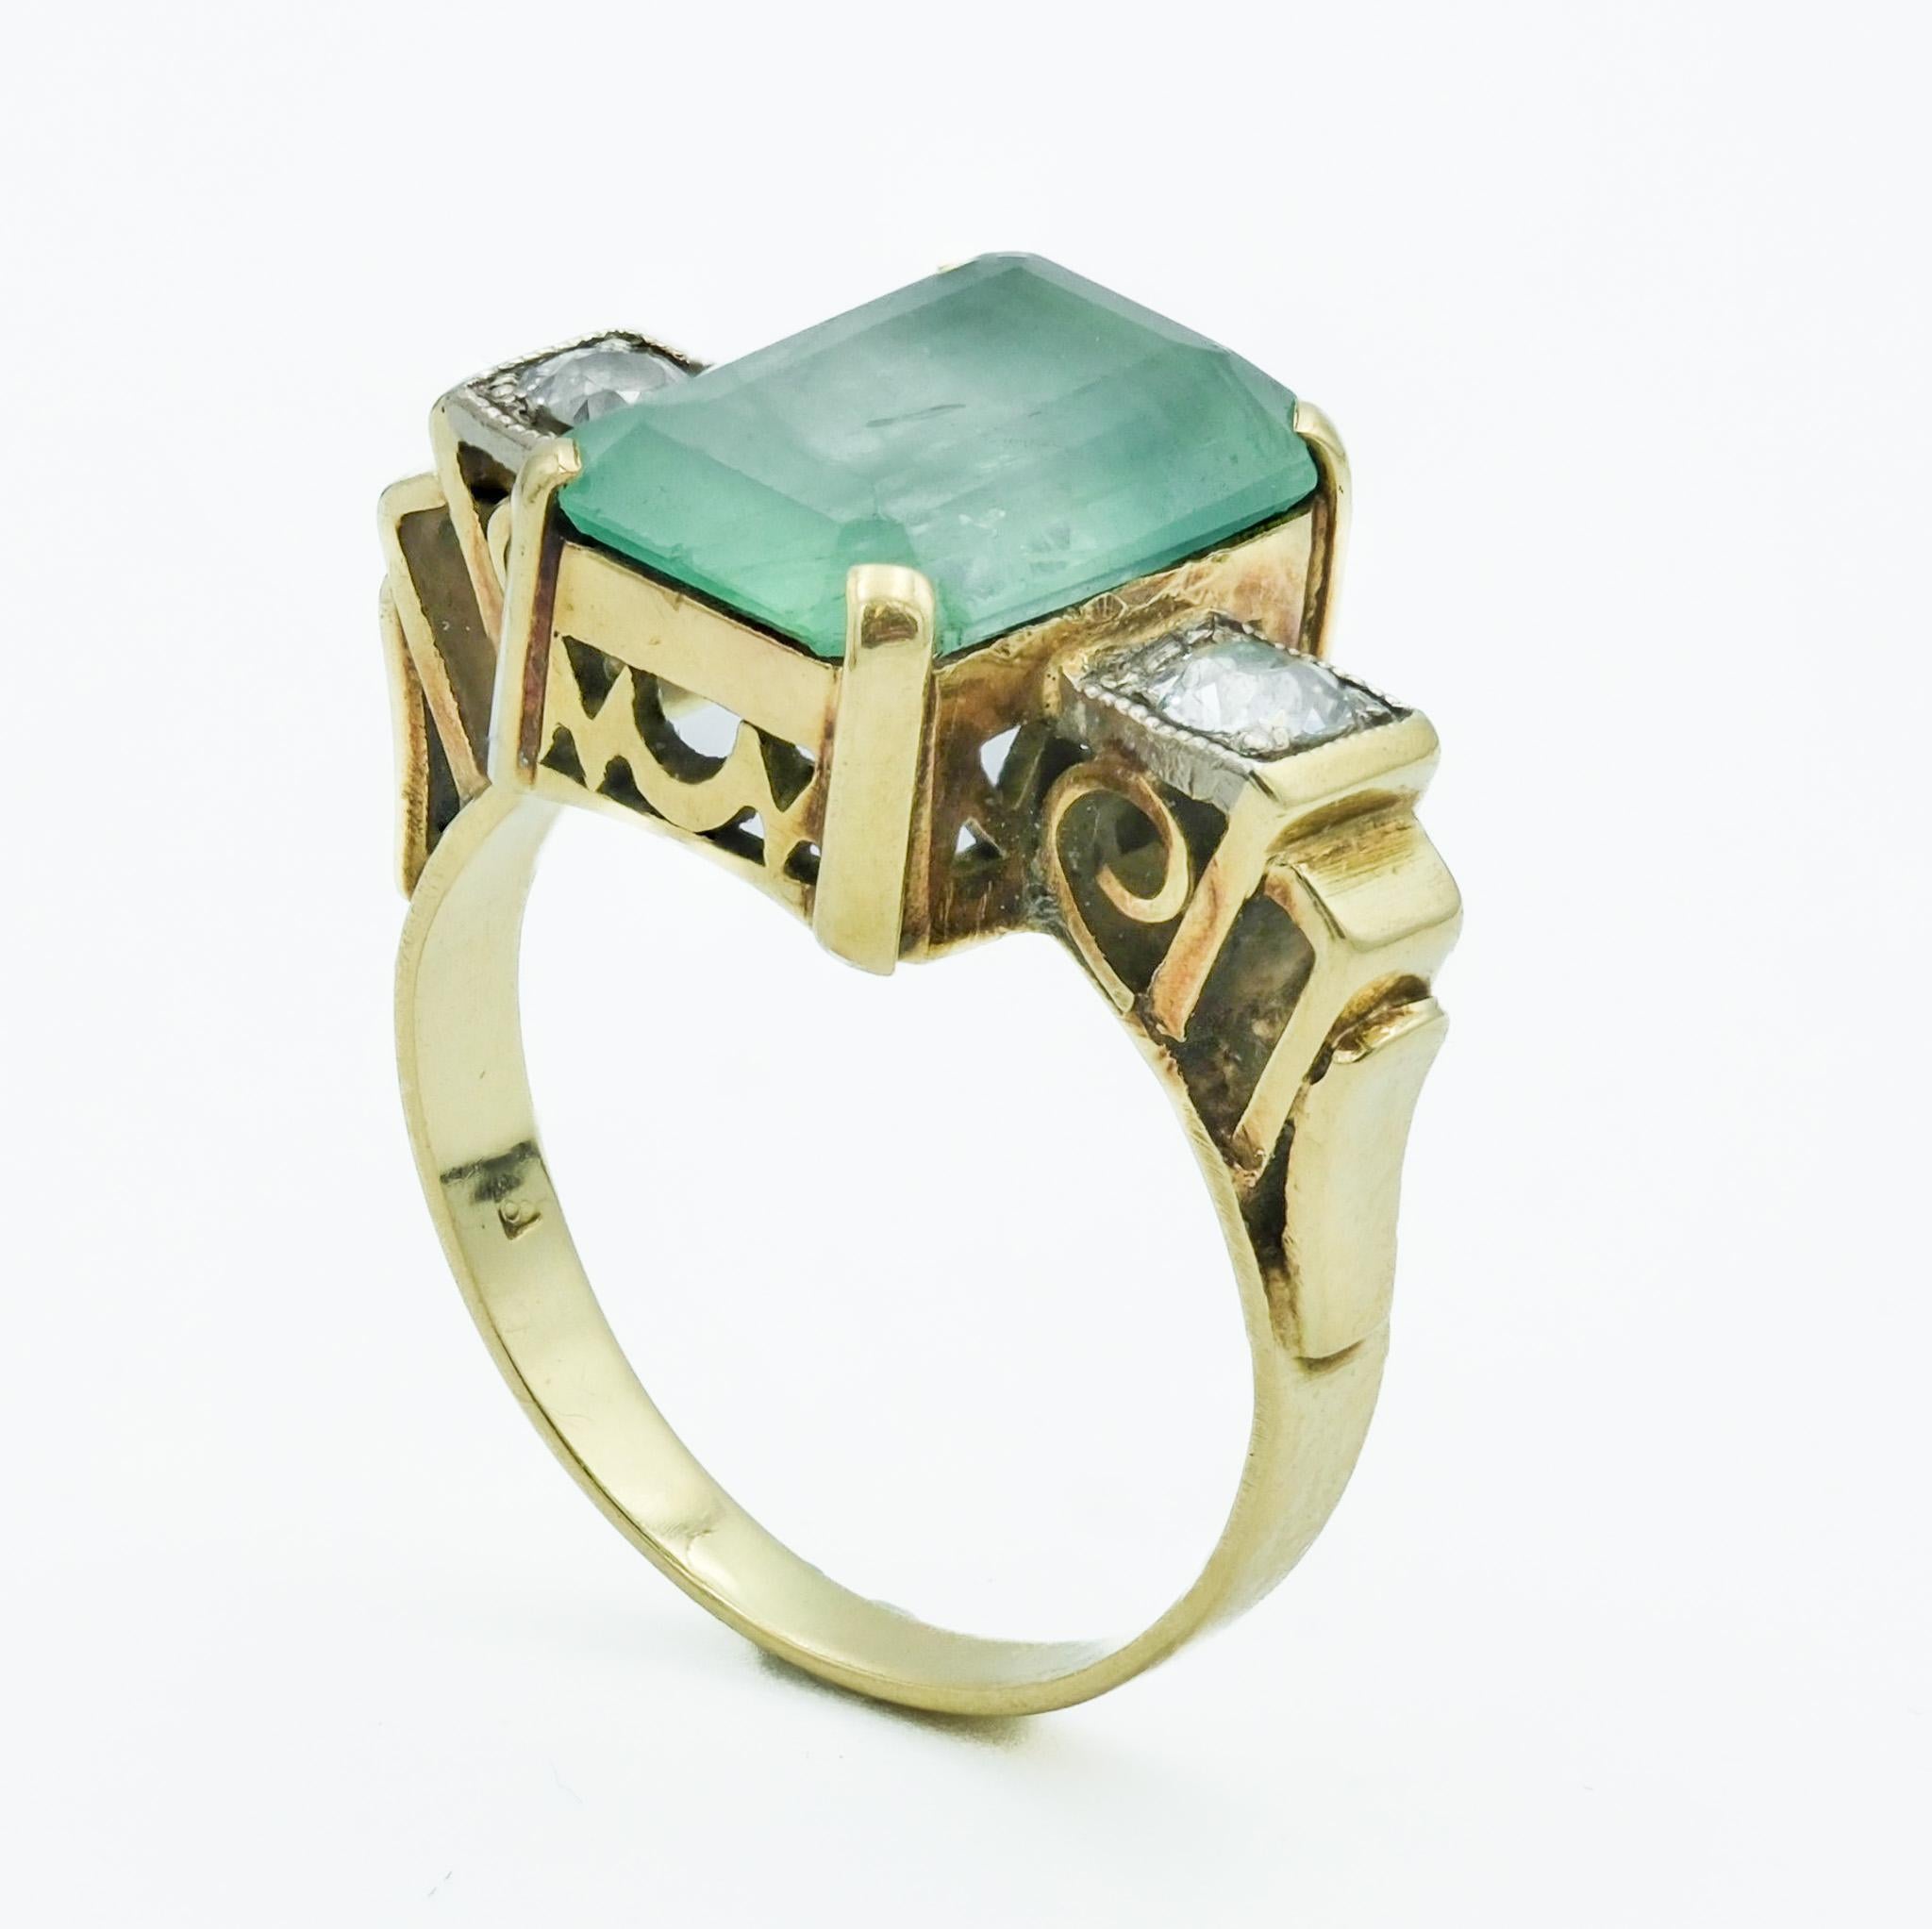 This late Victorian ring presents a robust design, featuring a central 3.18-carat emerald, set within a 14 karat yellow gold band. The emerald, prominent in size, is cut in a fashion typical of the period, allowing for a display of its green color